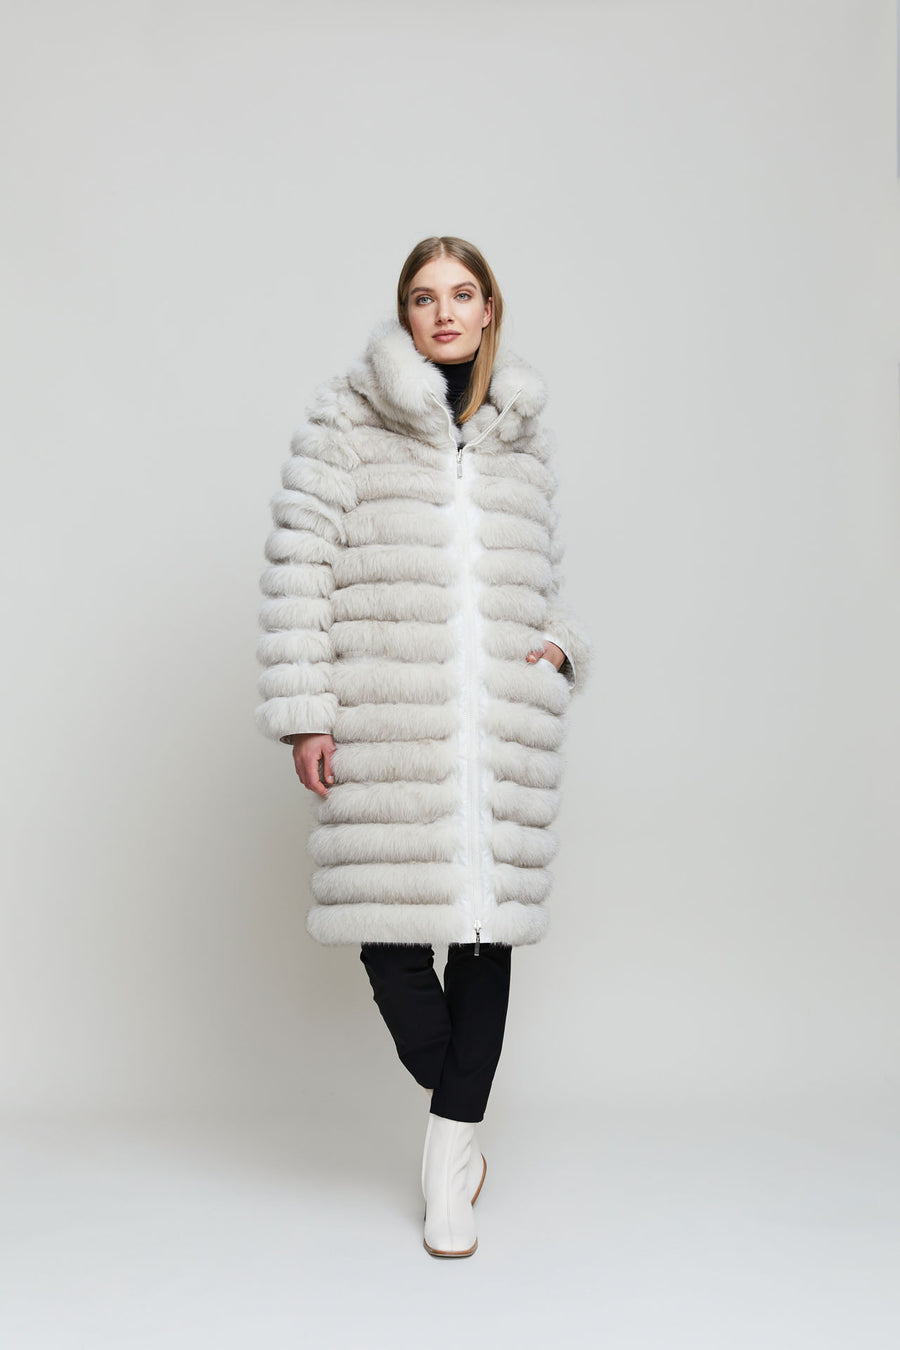 A reversible fox fur coat, that on one side resembles a padded coat, and on the other side is a fur coat with a rounded back, giving the coat a contemporary look